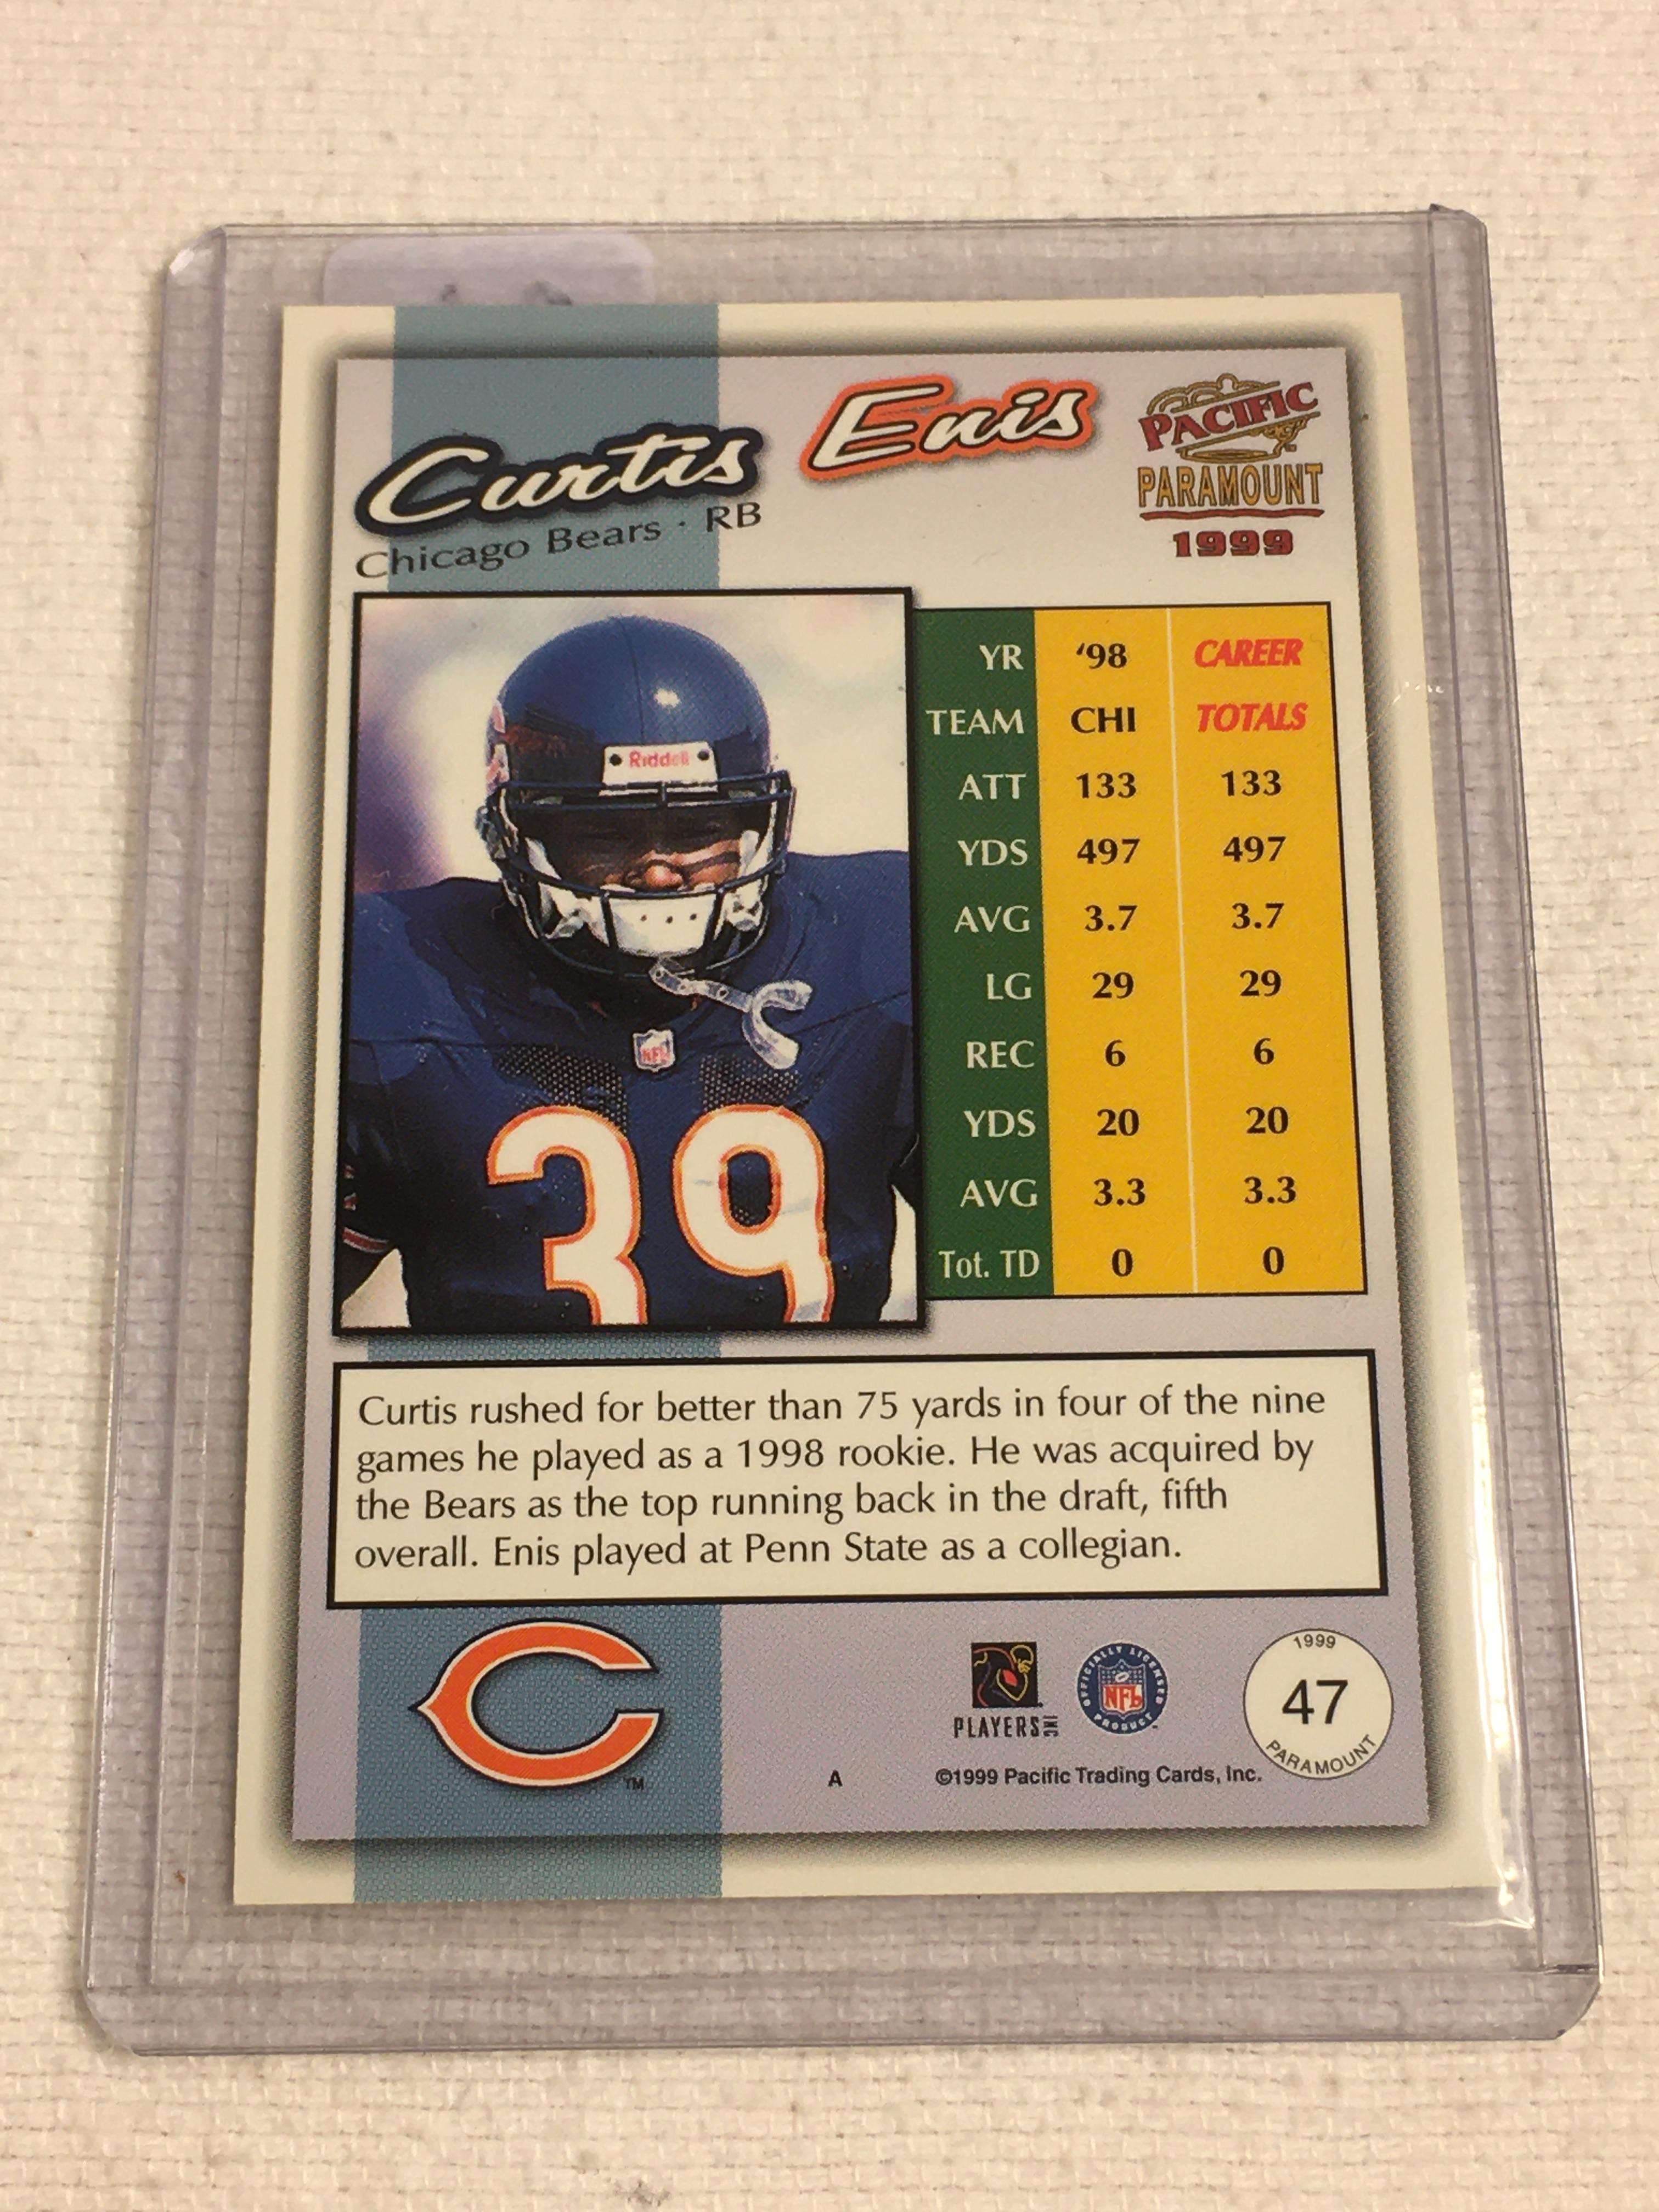 Collector 1999 Pacific Trading Cards Chicago Bears Curtis Enis Football Card No. 47